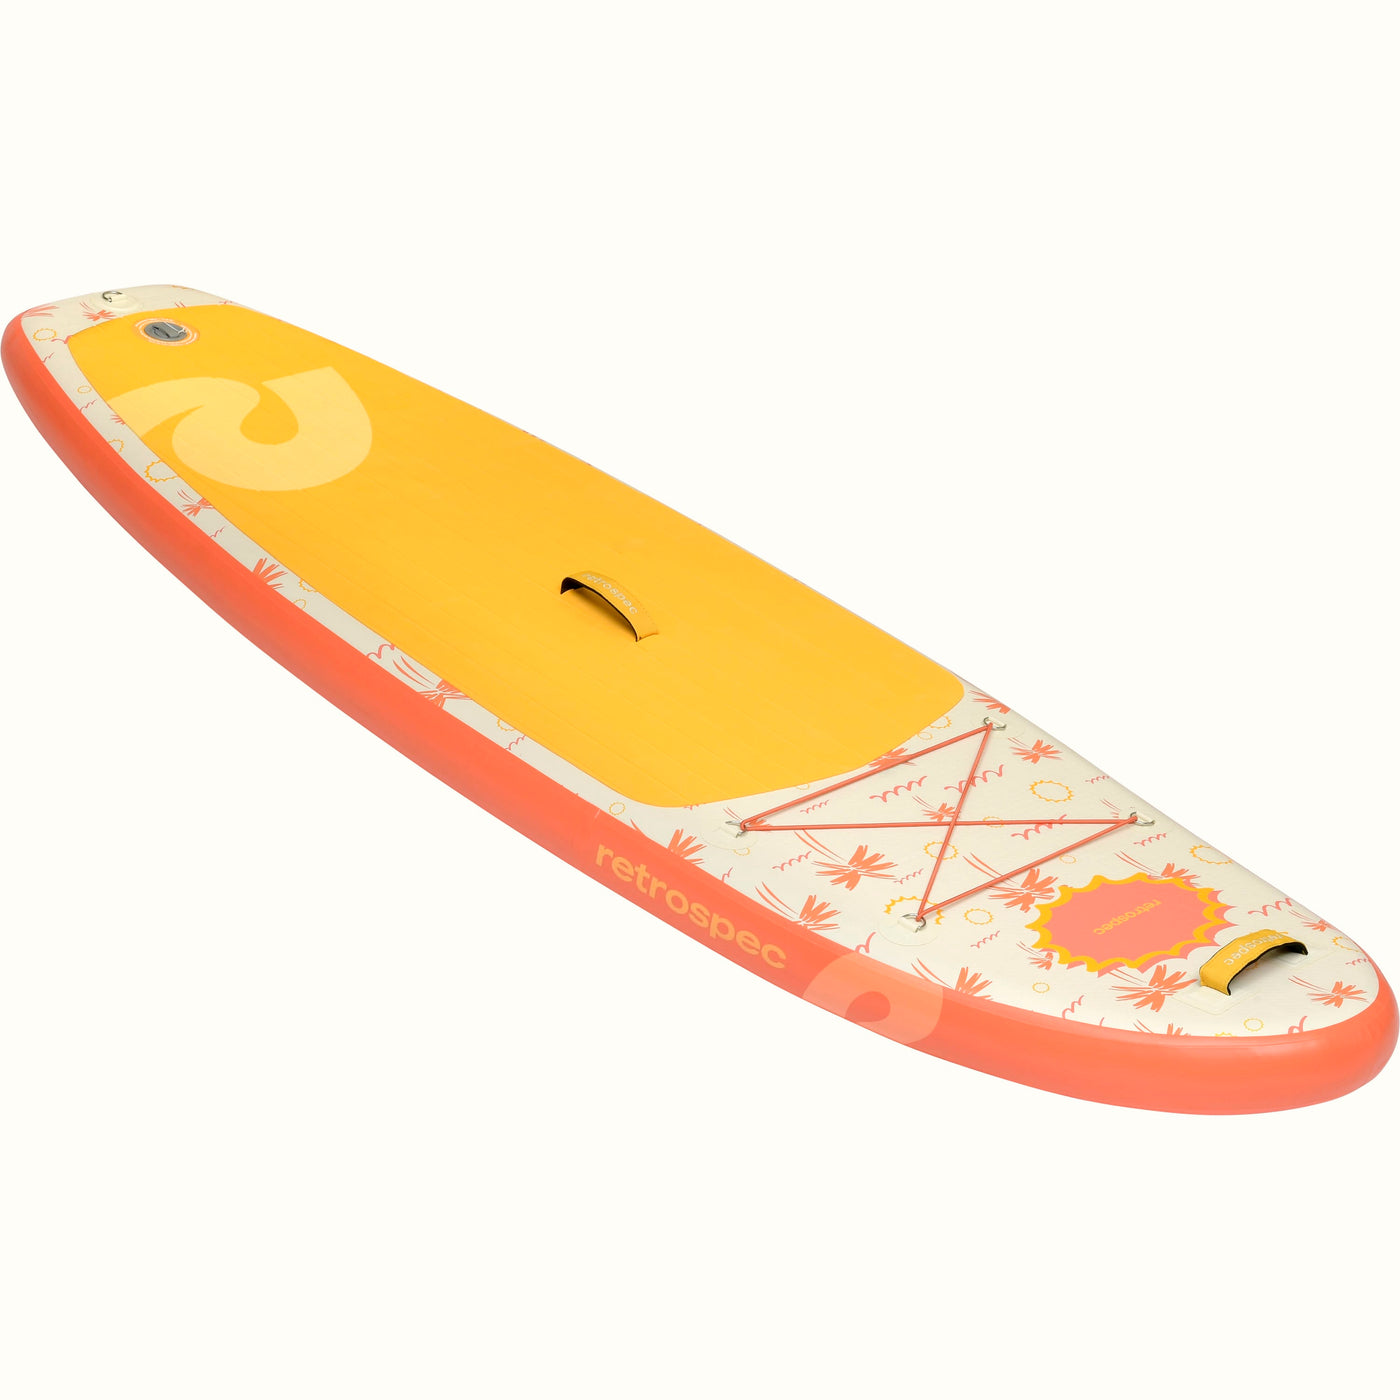 Weekender Nano 2 Kids’ Inflatable Stand Up Paddle Board 8’ | Summer Punch